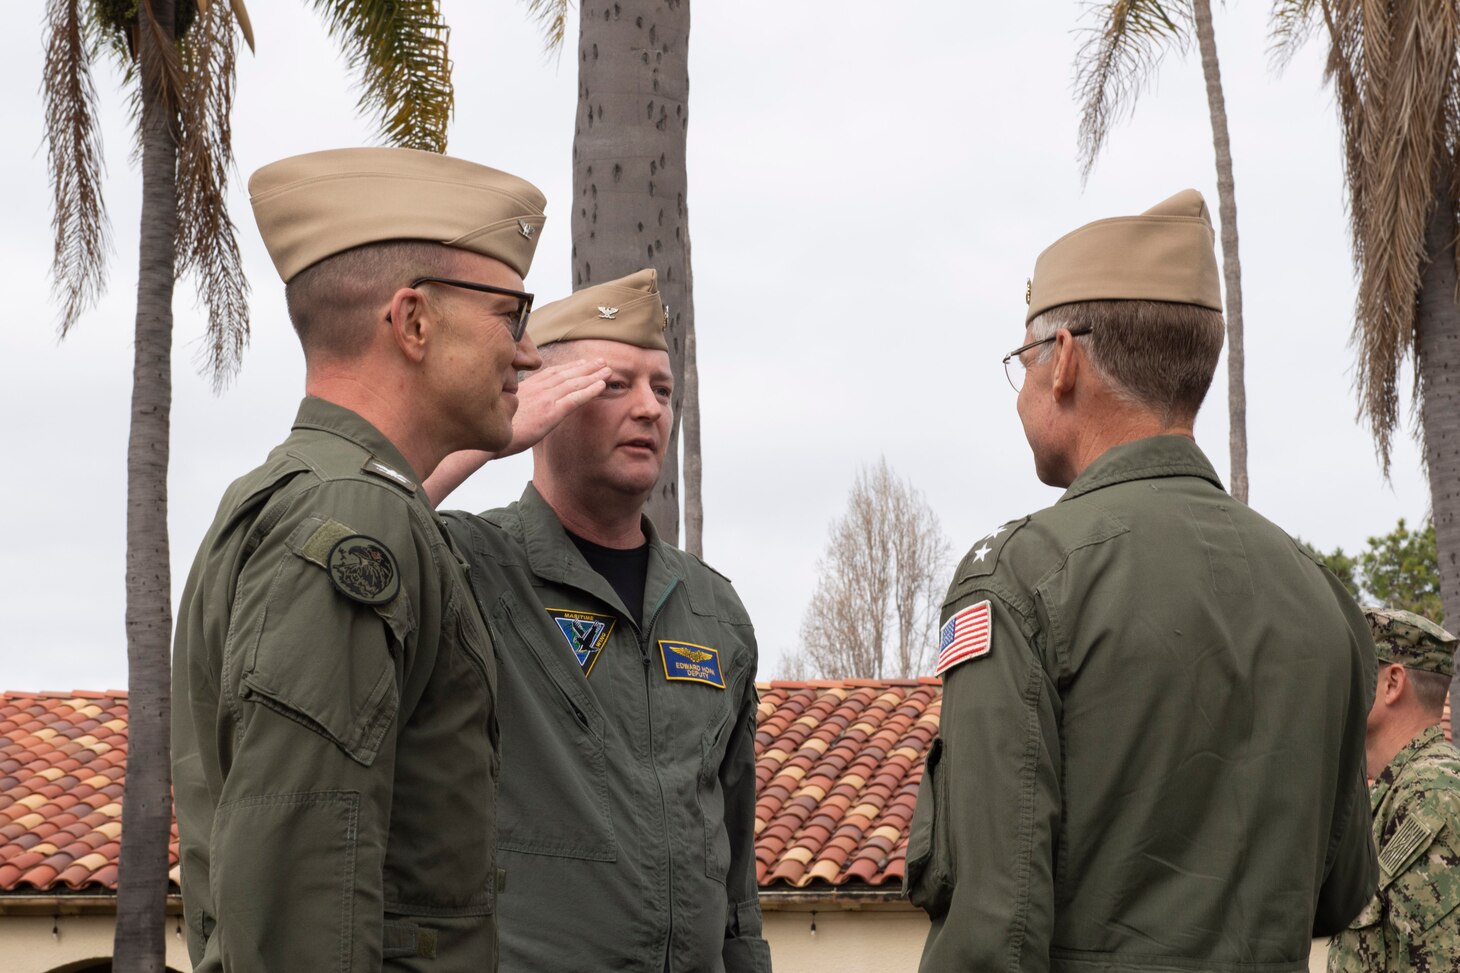 Capt. Edward Hoak (middle), reports to Rear Adm. Scott Jones, Commander, Naval Air Force Reserve (right) to assume command as MSW commodore during a change of command ceremony in the courtyard of the World Famous I-Bar at Naval Base Coronado, Mar. 3.